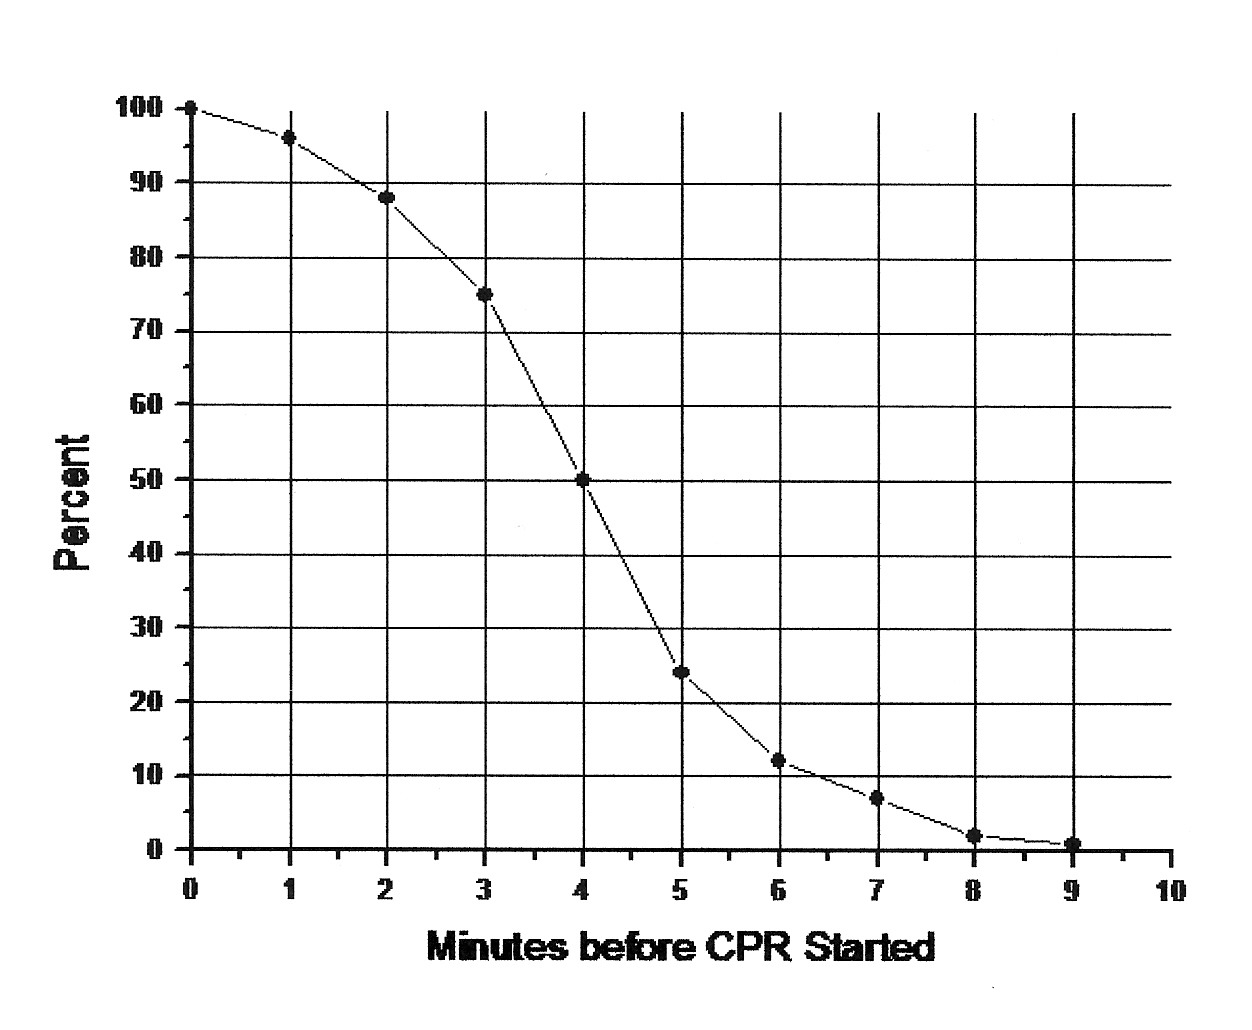 Survival with CPR